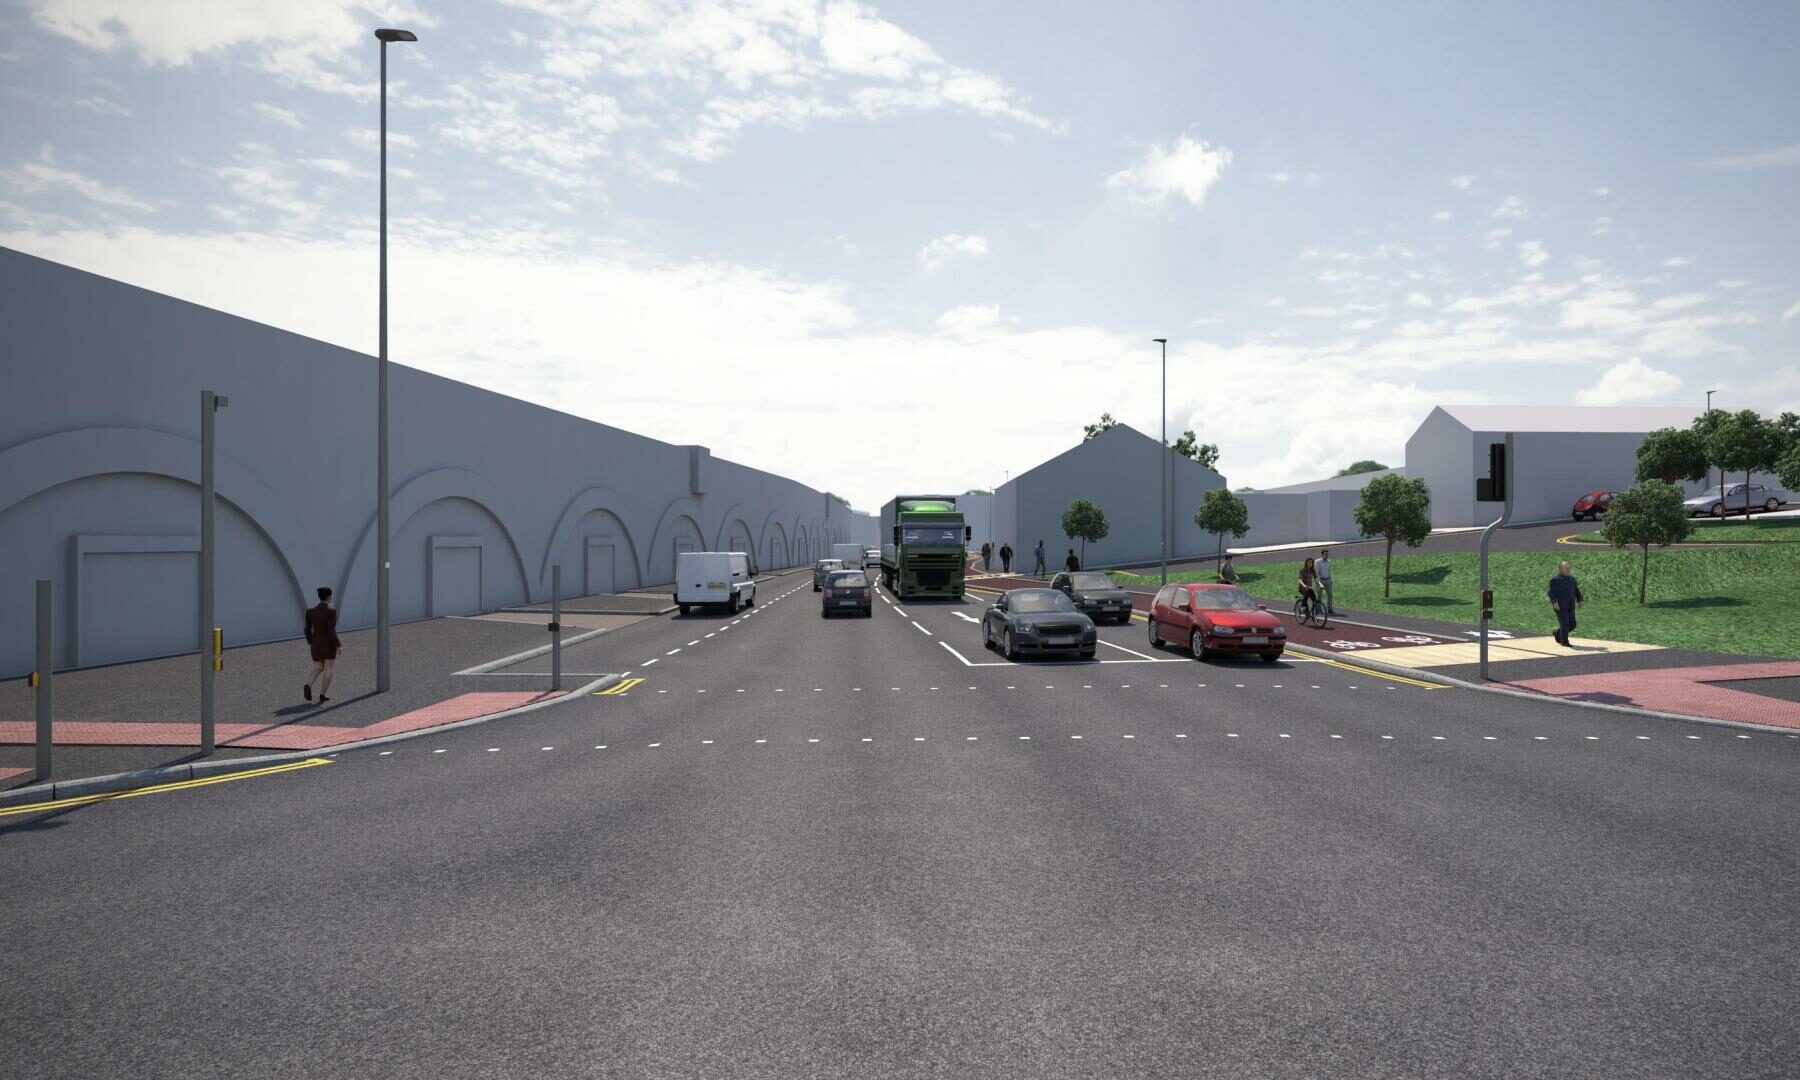 An artist's impression of what South College Street will look like once the project is finished, looking south from the Palmerston Place junction.